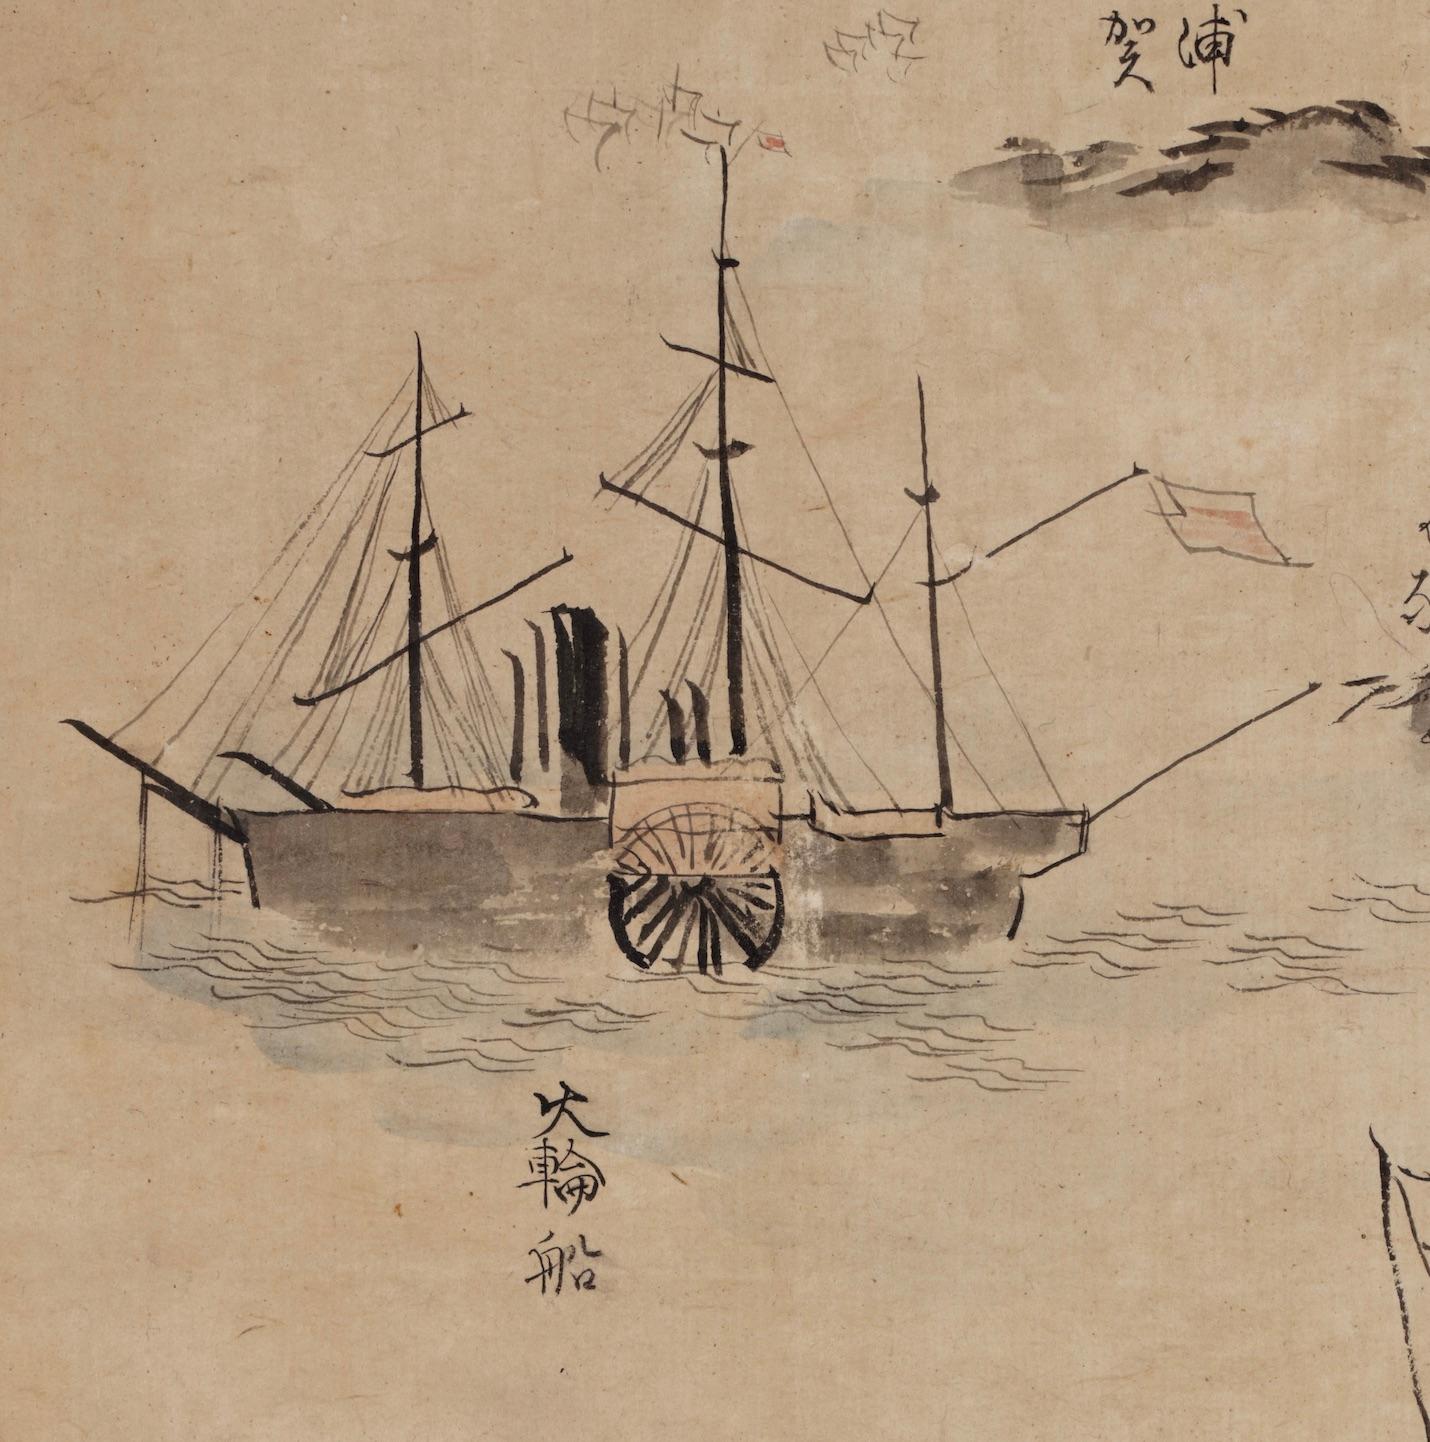 Attributed to Ukita Ikkei (1795-1859)

Hanging scroll painting of the American ship commanded by Commodore Matthew Perry in Uraga Bay, annotated: ‘1854 Spring first month 8 xx (February) Kan-no Hachiro saw this big American wheel vessel past Cape of